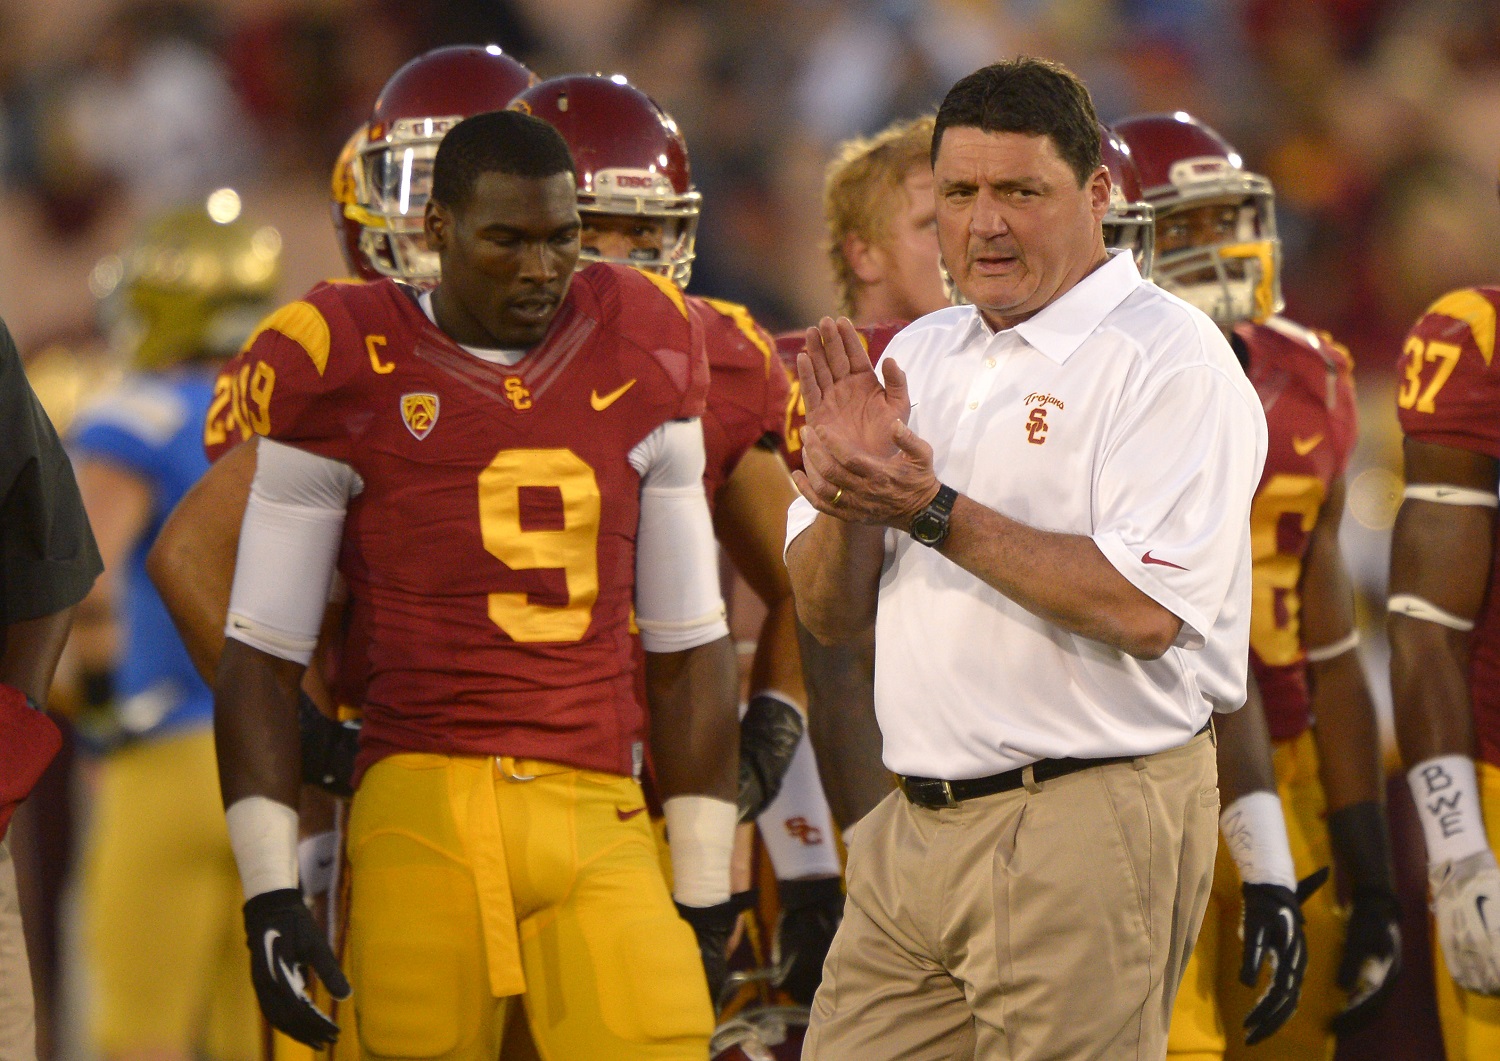 Southern California interim head coach Ed Orgeron, right, cheers on his team as wide receiver Marqise Lee, left, looks on during warmups prior to an NCAA college football game against UCLA, Saturday, Nov. 30, 2013, in Los Angeles. (AP Photo/Mark J. Terrill)